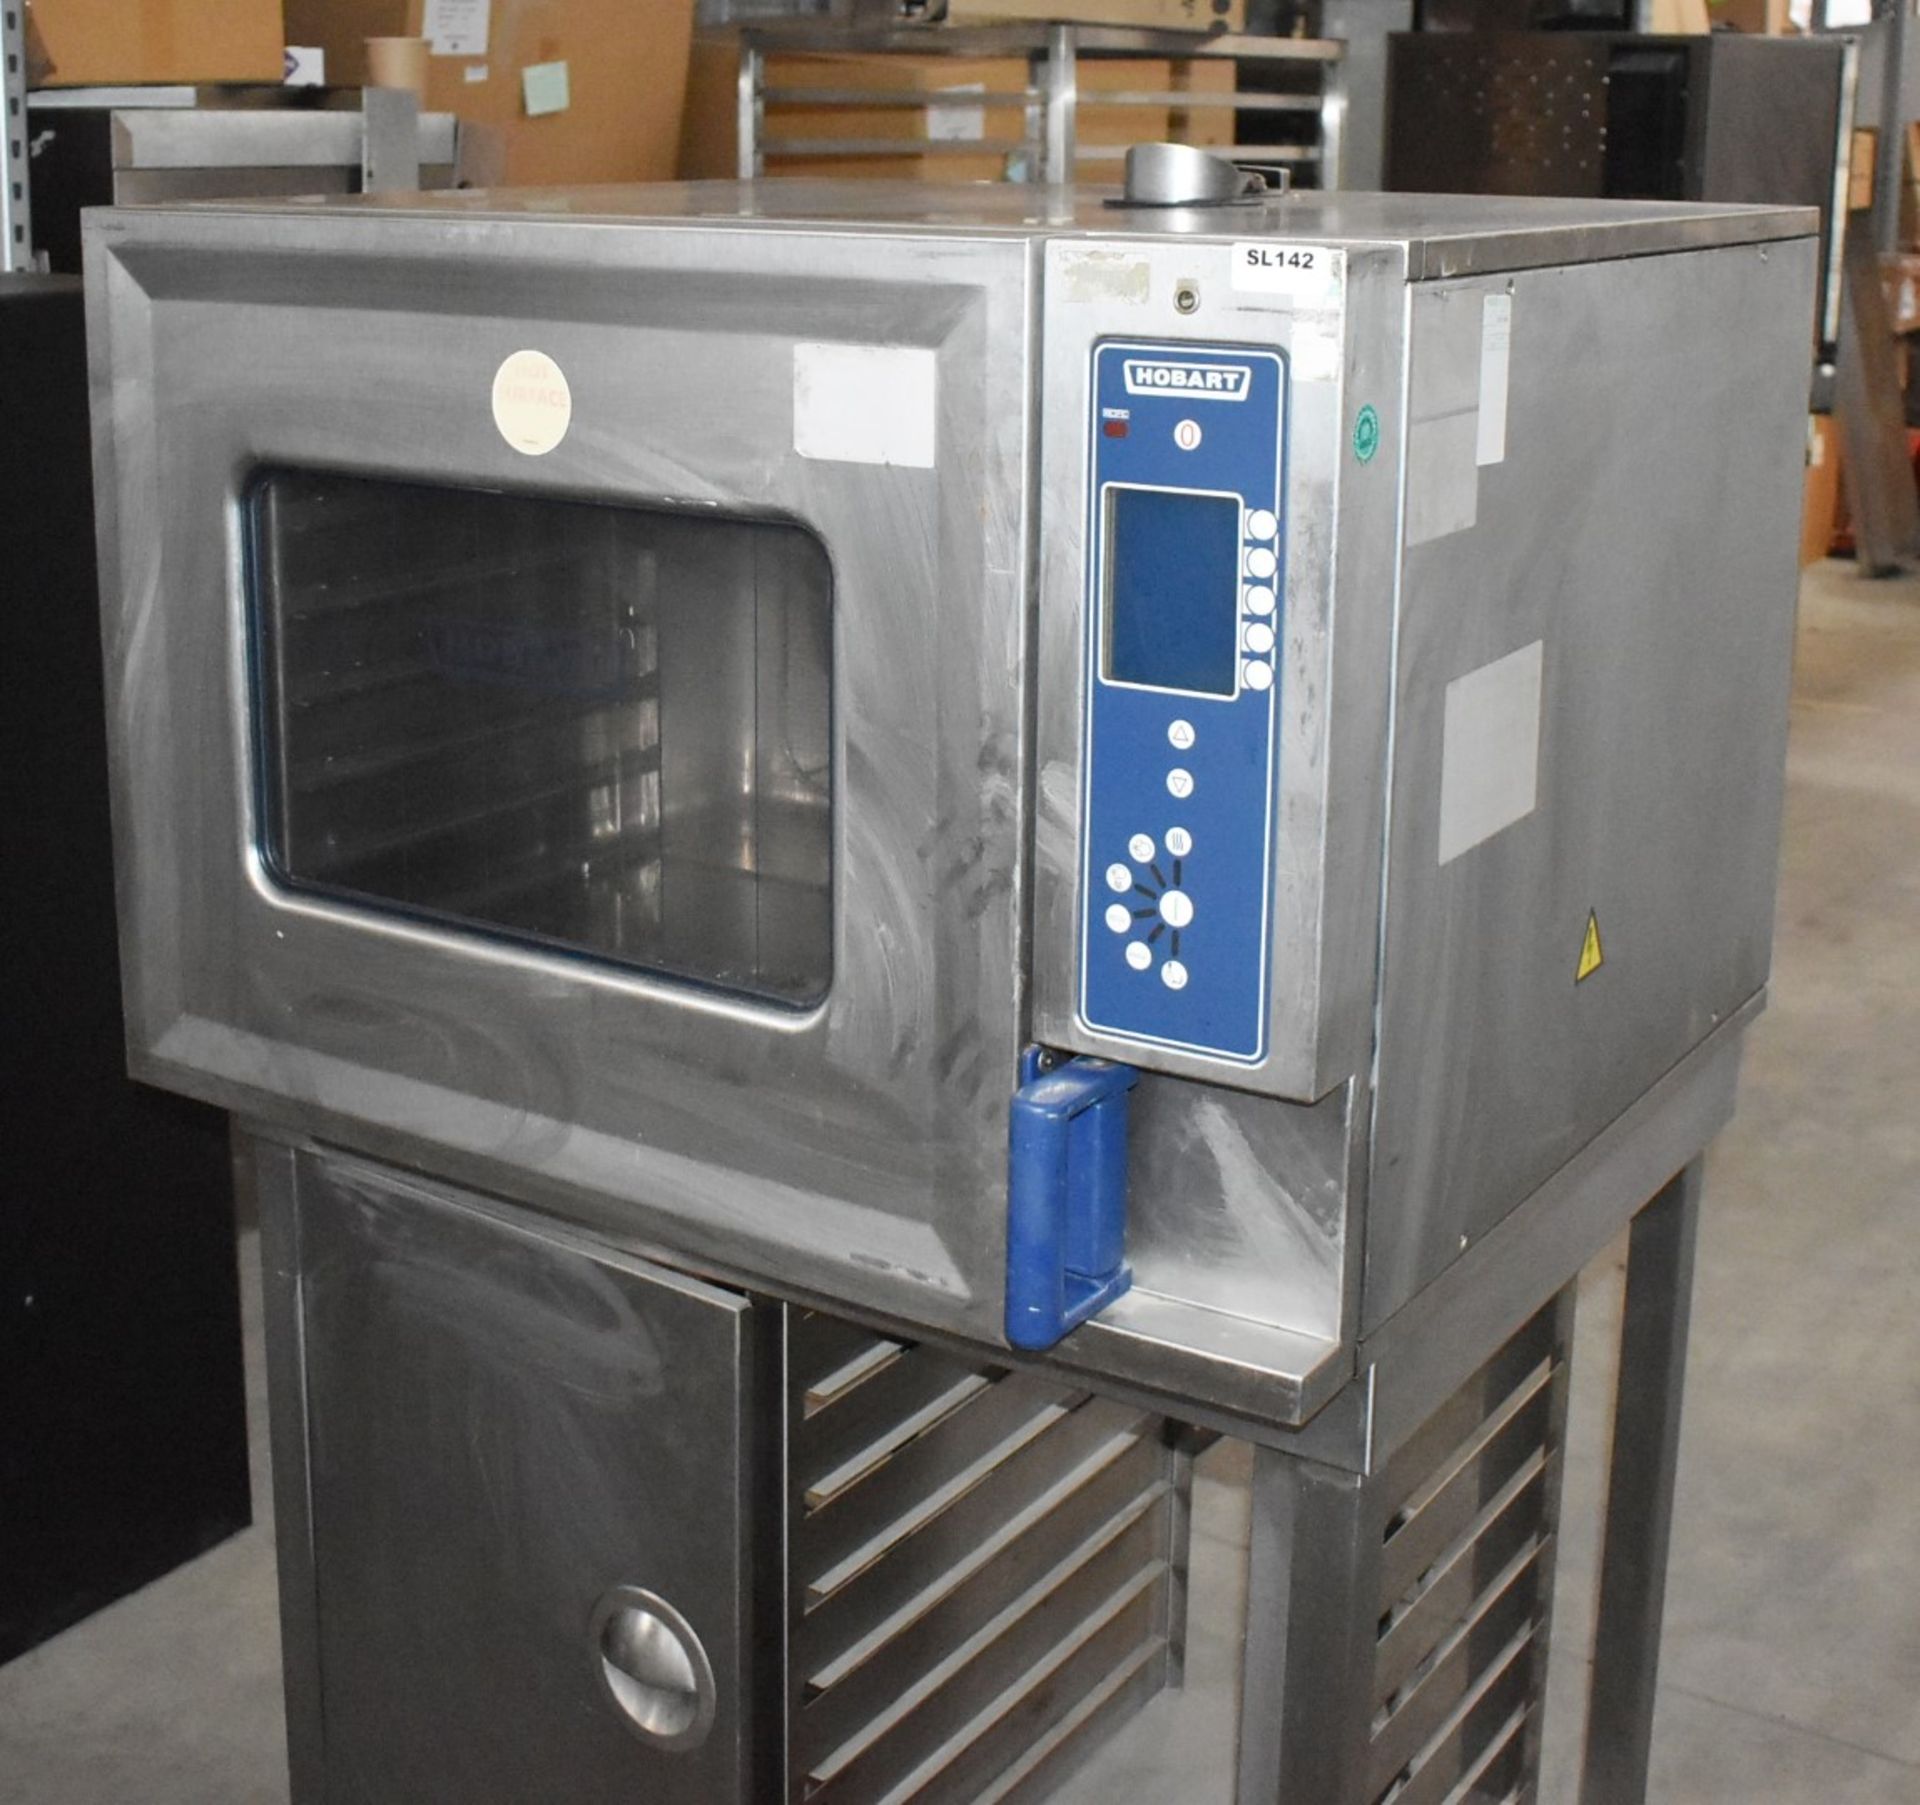 1 x Hobart 6 Grid Combi Oven With Stand - 3 Phase Power - Recently Removed From Major Supermarket - Image 4 of 10